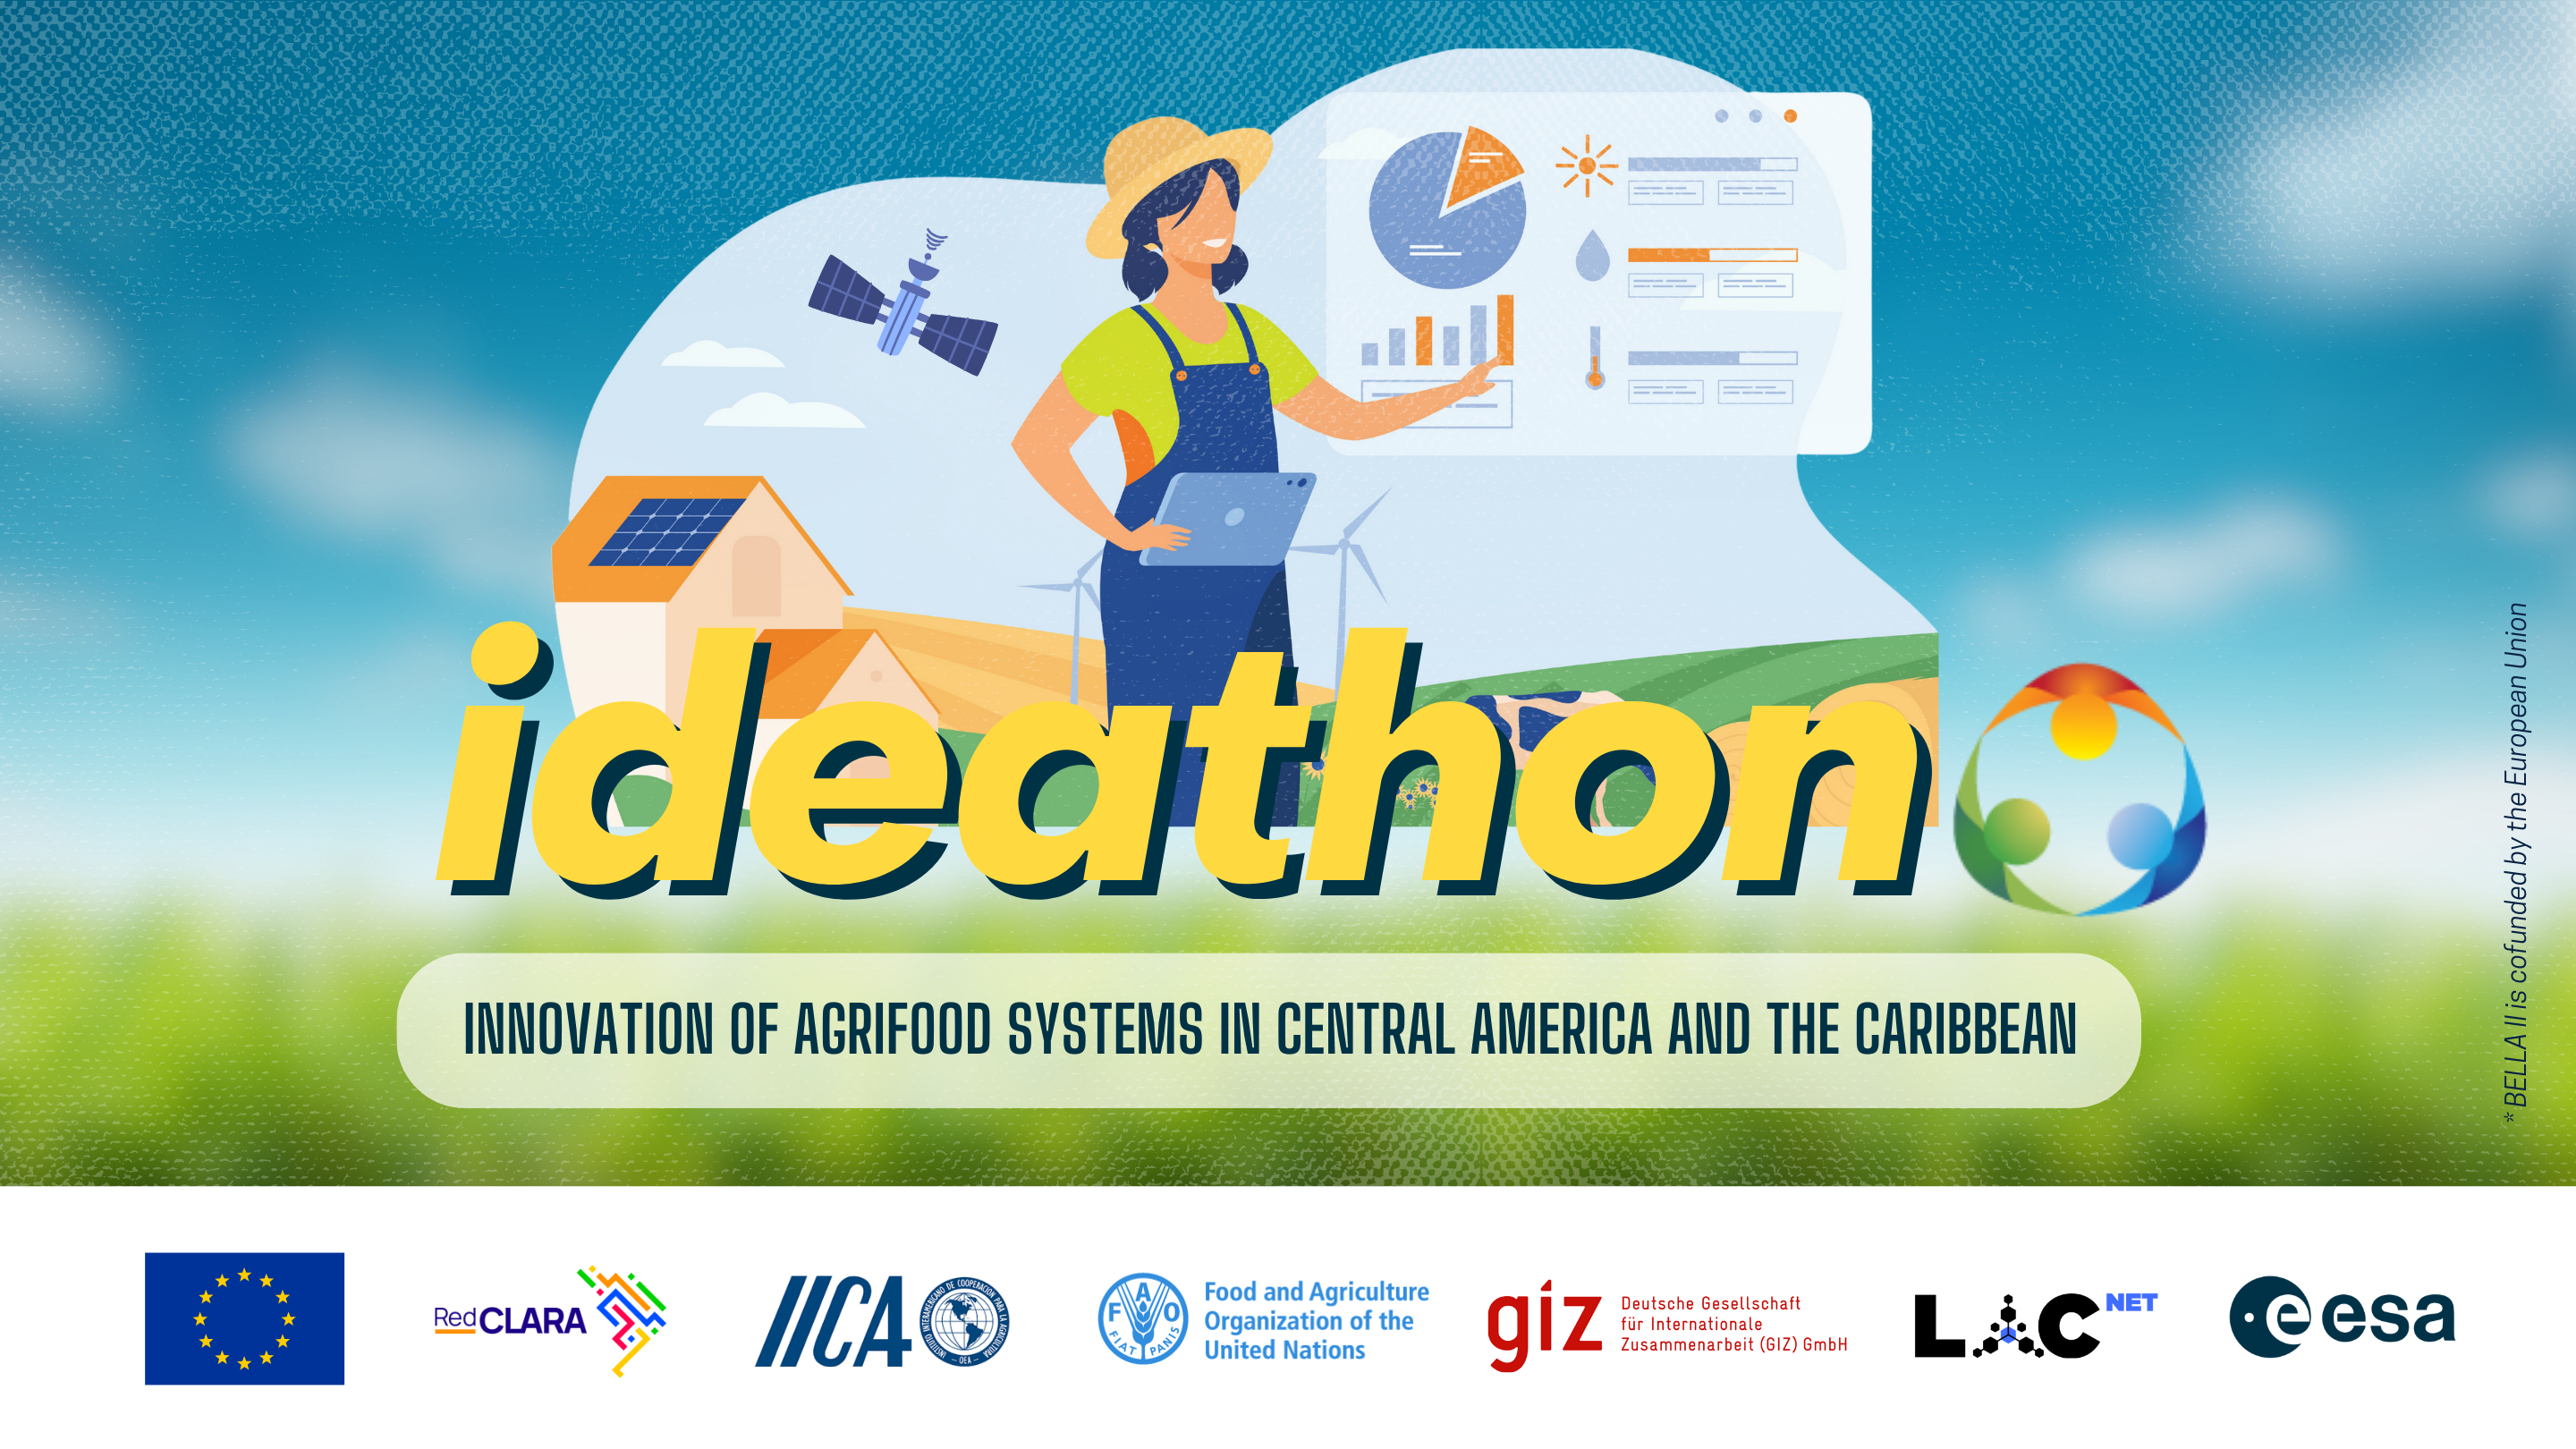 New BELLA II Ideathon: innovative ideas to transform agri-food systems in Central America and the Caribbean